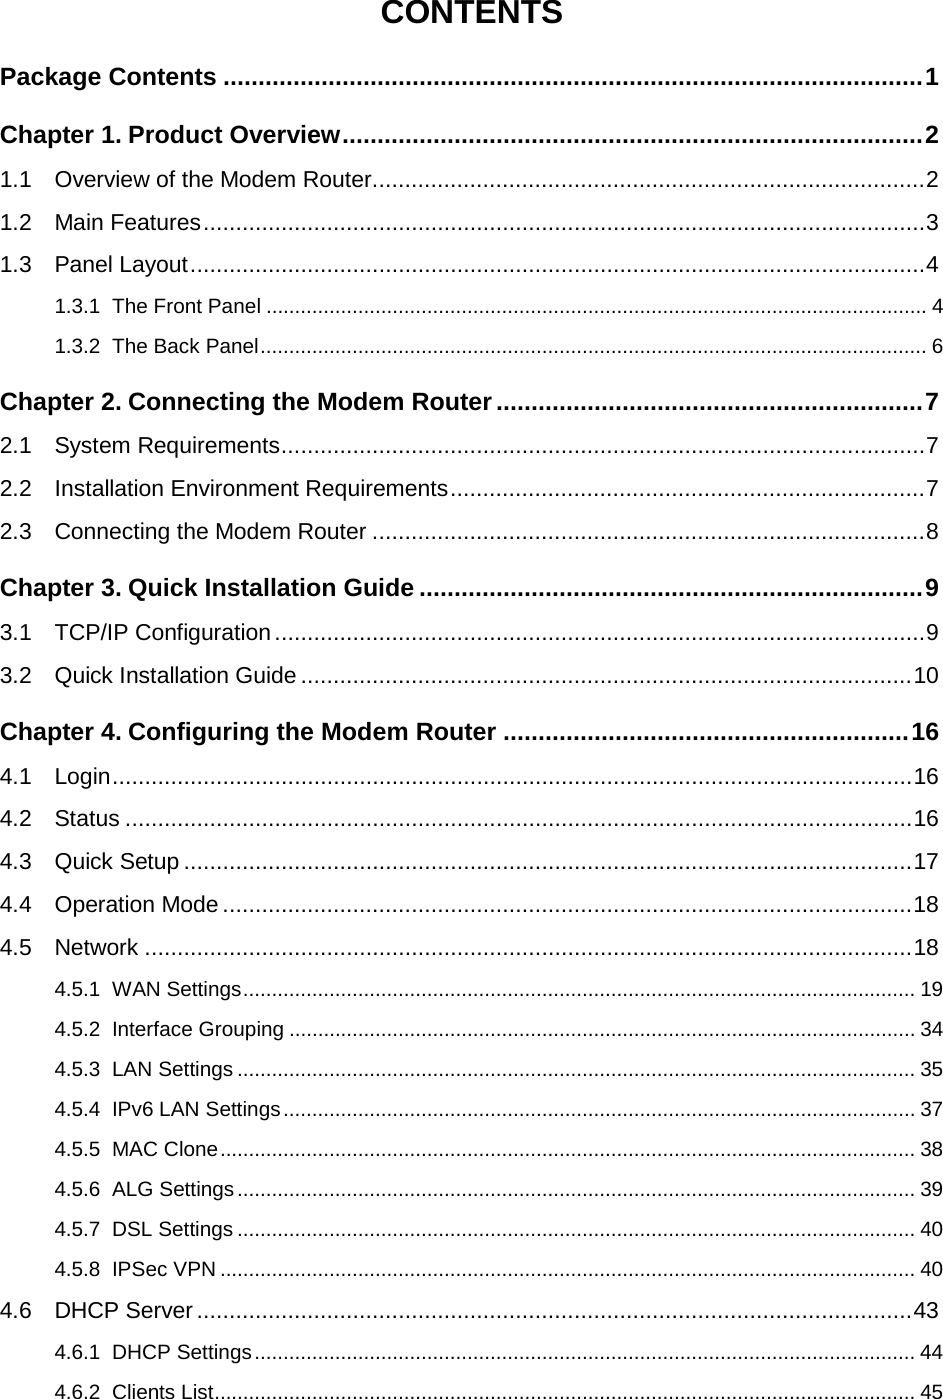  CONTENTS Package Contents .................................................................................................... 1 Chapter 1. Product Overview ................................................................................... 2 1.1 Overview of the Modem Router ..................................................................................... 2 1.2 Main Features ............................................................................................................... 3 1.3 Panel Layout ................................................................................................................. 4 1.3.1 The Front Panel ................................................................................................................... 4 1.3.2 The Back Panel .................................................................................................................... 6 Chapter 2. Connecting the Modem Router ............................................................. 7 2.1 System Requirements ................................................................................................... 7 2.2 Installation Environment Requirements ......................................................................... 7 2.3 Connecting the Modem Router ..................................................................................... 8 Chapter 3. Quick Installation Guide ........................................................................ 9 3.1 TCP/IP Configuration .................................................................................................... 9 3.2 Quick Installation Guide .............................................................................................. 10 Chapter 4. Configuring the Modem Router .......................................................... 16 4.1 Login ........................................................................................................................... 16 4.2 Status ......................................................................................................................... 16 4.3 Quick Setup ................................................................................................................ 17 4.4 Operation Mode .......................................................................................................... 18 4.5 Network ...................................................................................................................... 18 4.5.1 WAN Settings ..................................................................................................................... 19 4.5.2 Interface Grouping ............................................................................................................. 34 4.5.3 LAN Settings ...................................................................................................................... 35 4.5.4 IPv6 LAN Settings .............................................................................................................. 37 4.5.5 MAC Clone ......................................................................................................................... 38 4.5.6 ALG Settings ...................................................................................................................... 39 4.5.7 DSL Settings ...................................................................................................................... 40 4.5.8 IPSec VPN ......................................................................................................................... 40 4.6 DHCP Server .............................................................................................................. 43 4.6.1 DHCP Settings ................................................................................................................... 44 4.6.2 Clients List .......................................................................................................................... 45  